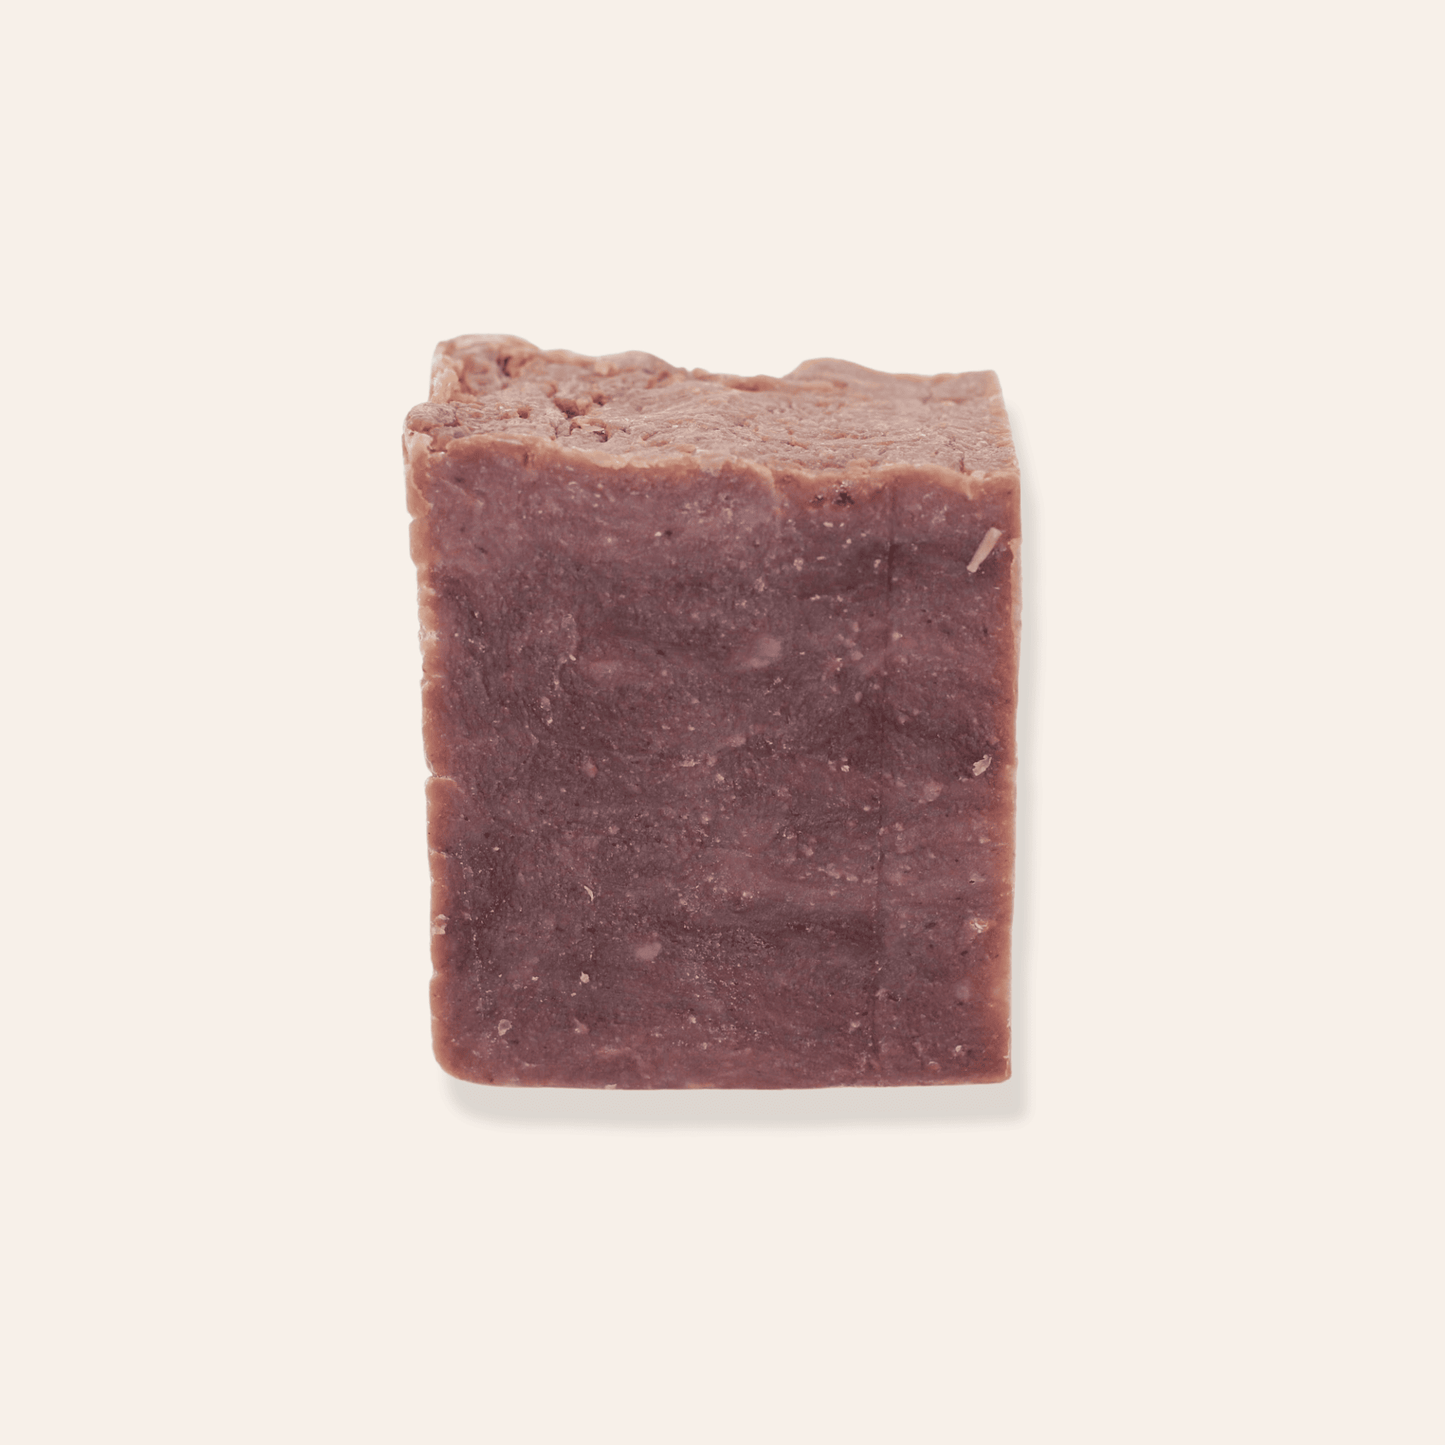 A bar of brick red natural coconut milk soap on a cream background.